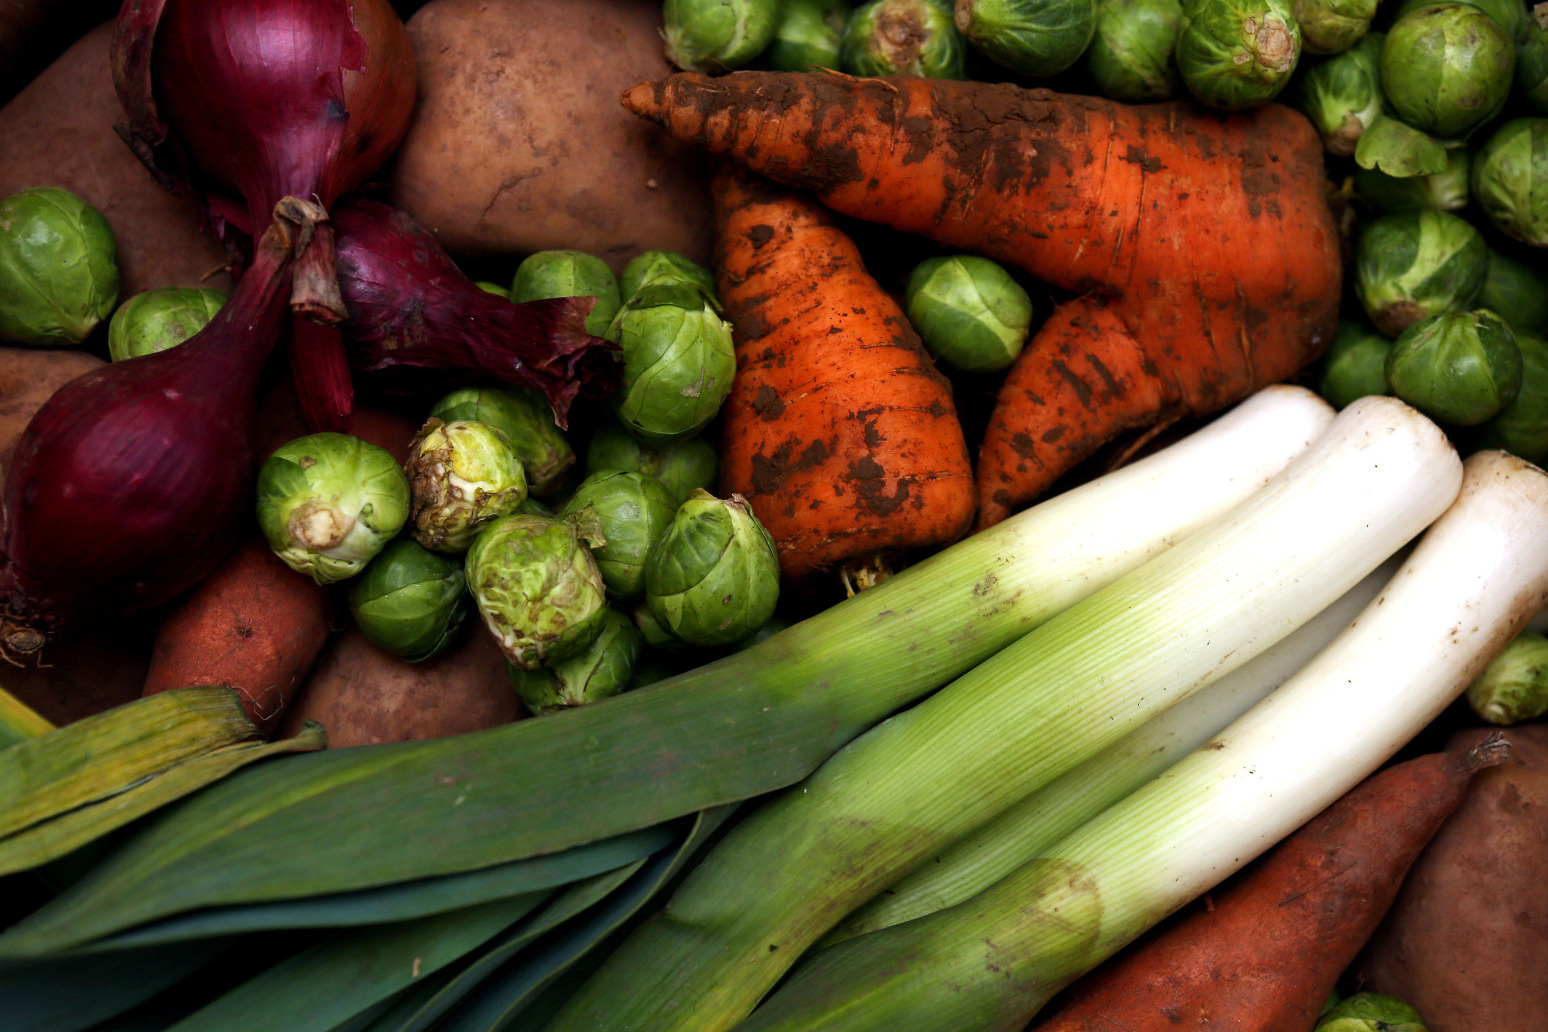 Subsidising fresh fruit and vegetables would increase consumption by up to 15